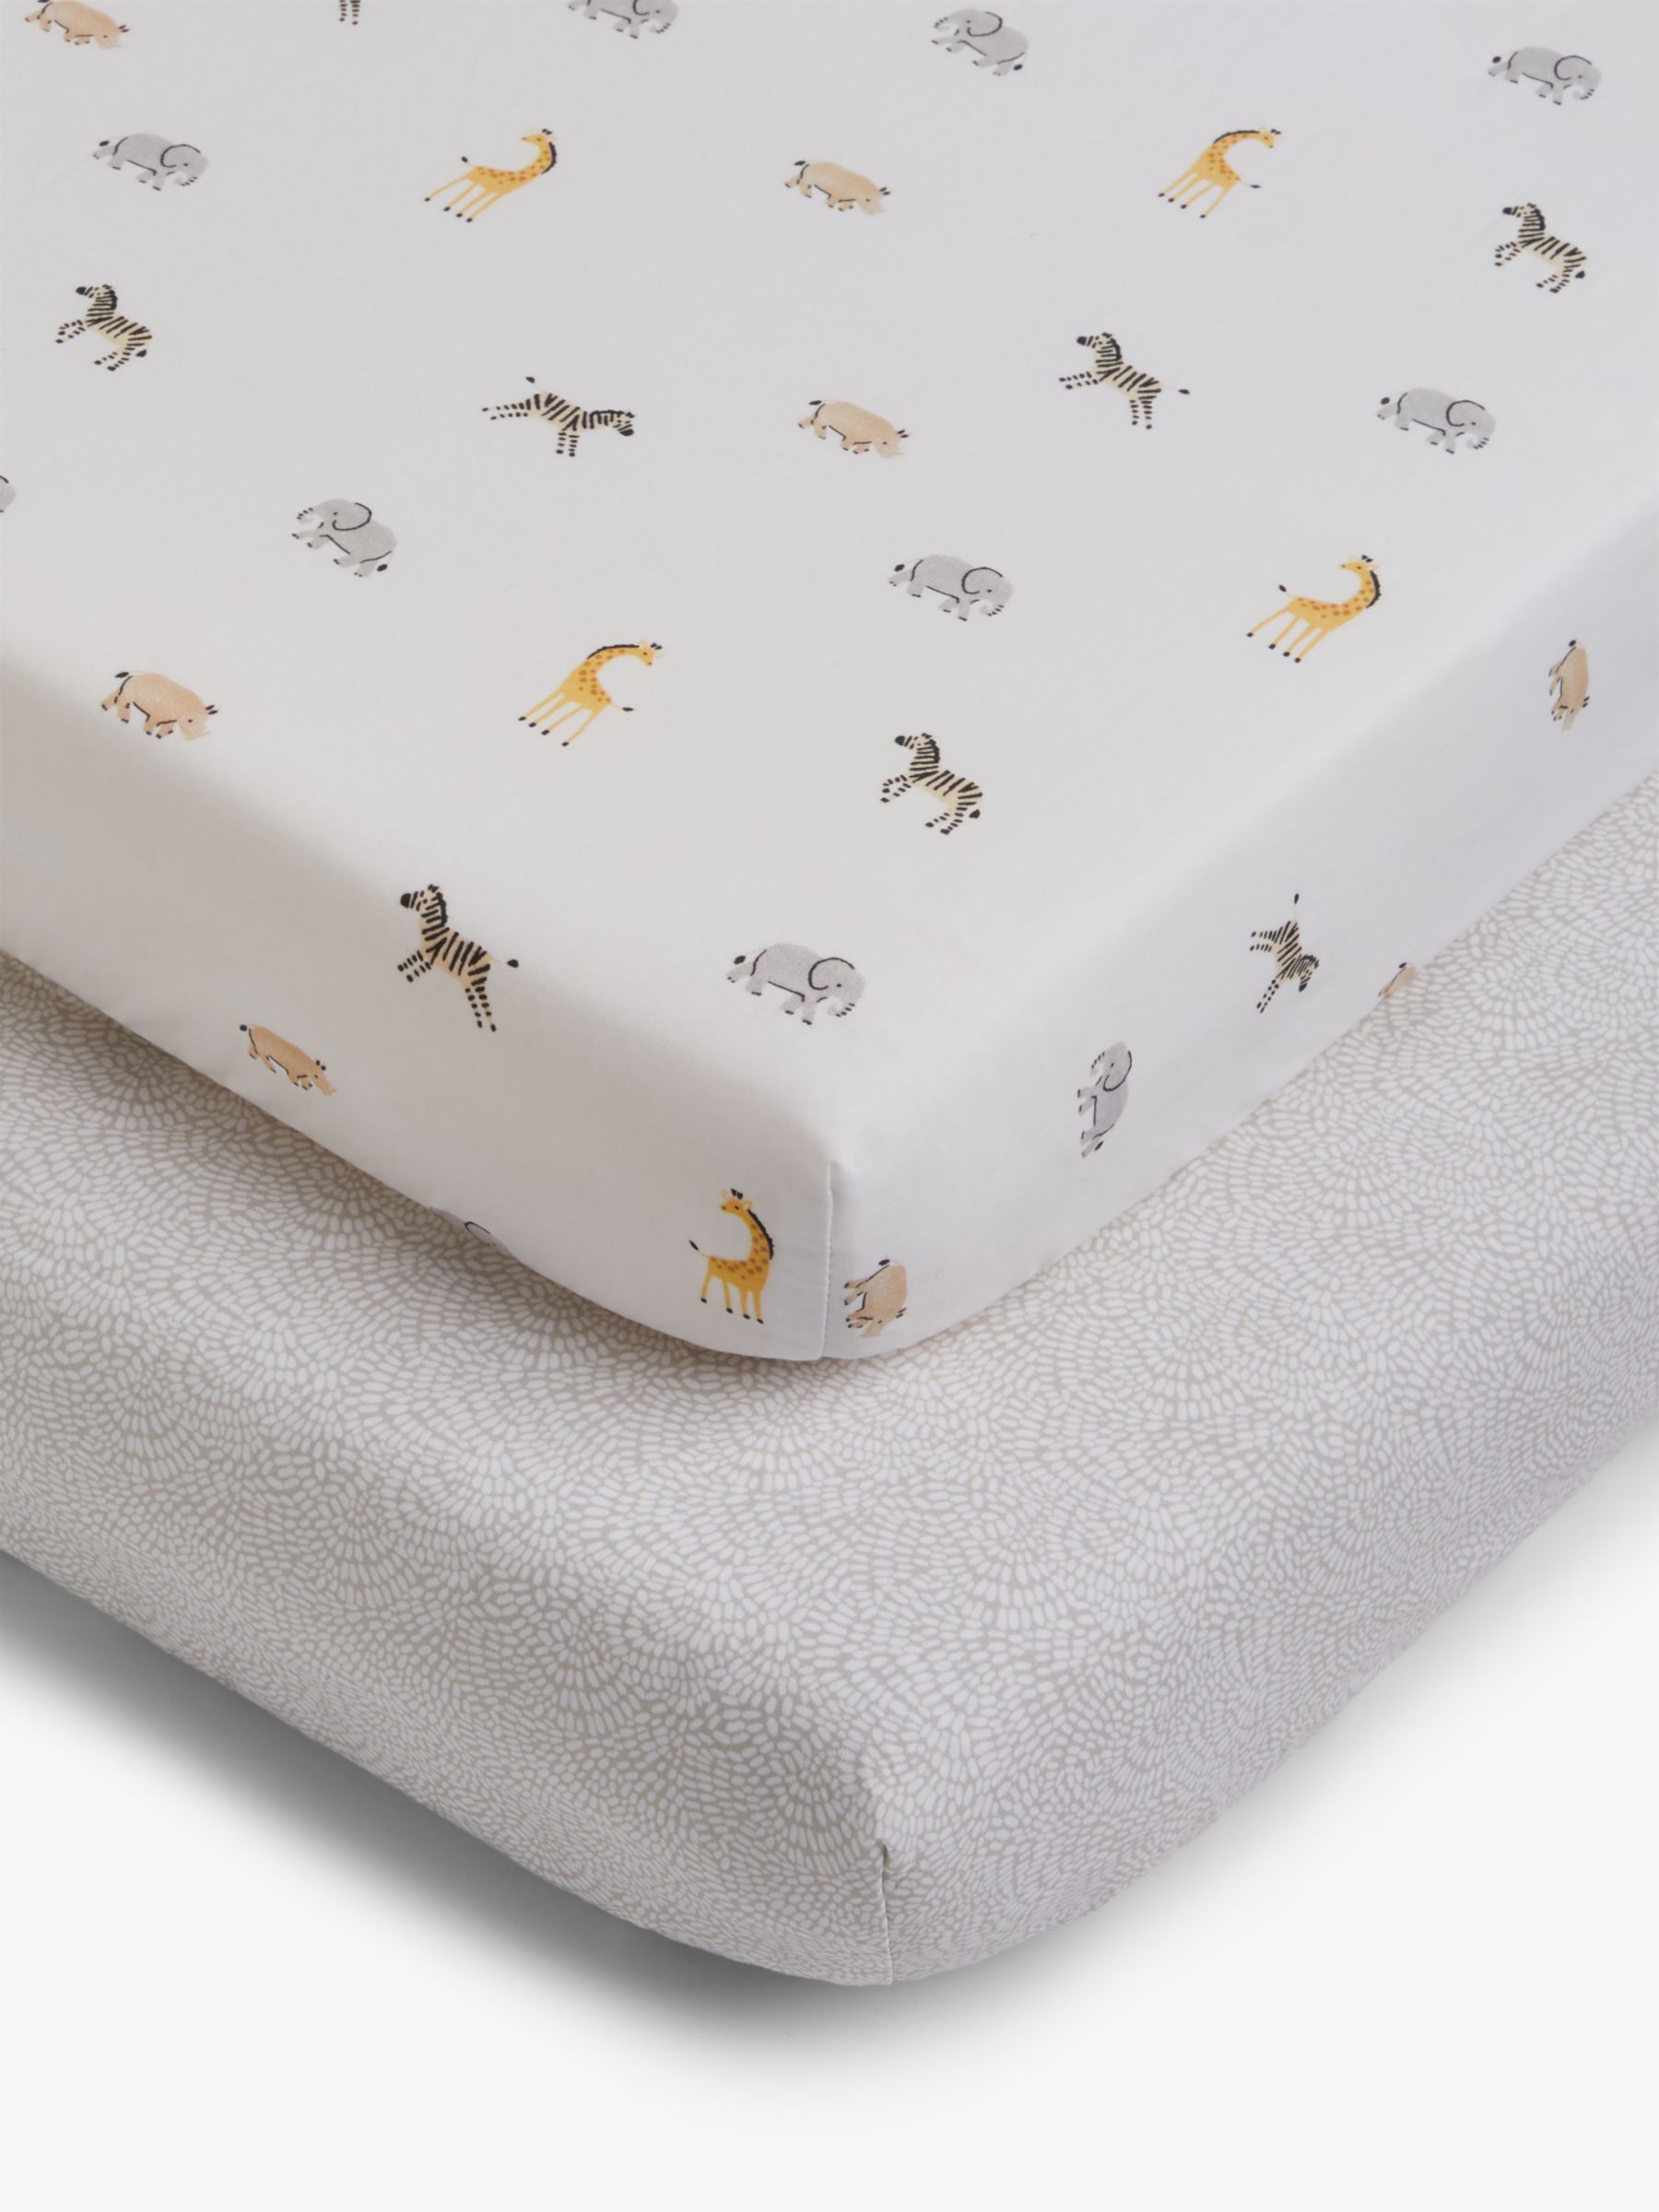 John Lewis Safari Print Cotton Fitted Cotbed Sheet, 70 x 140cm, Pack of 2